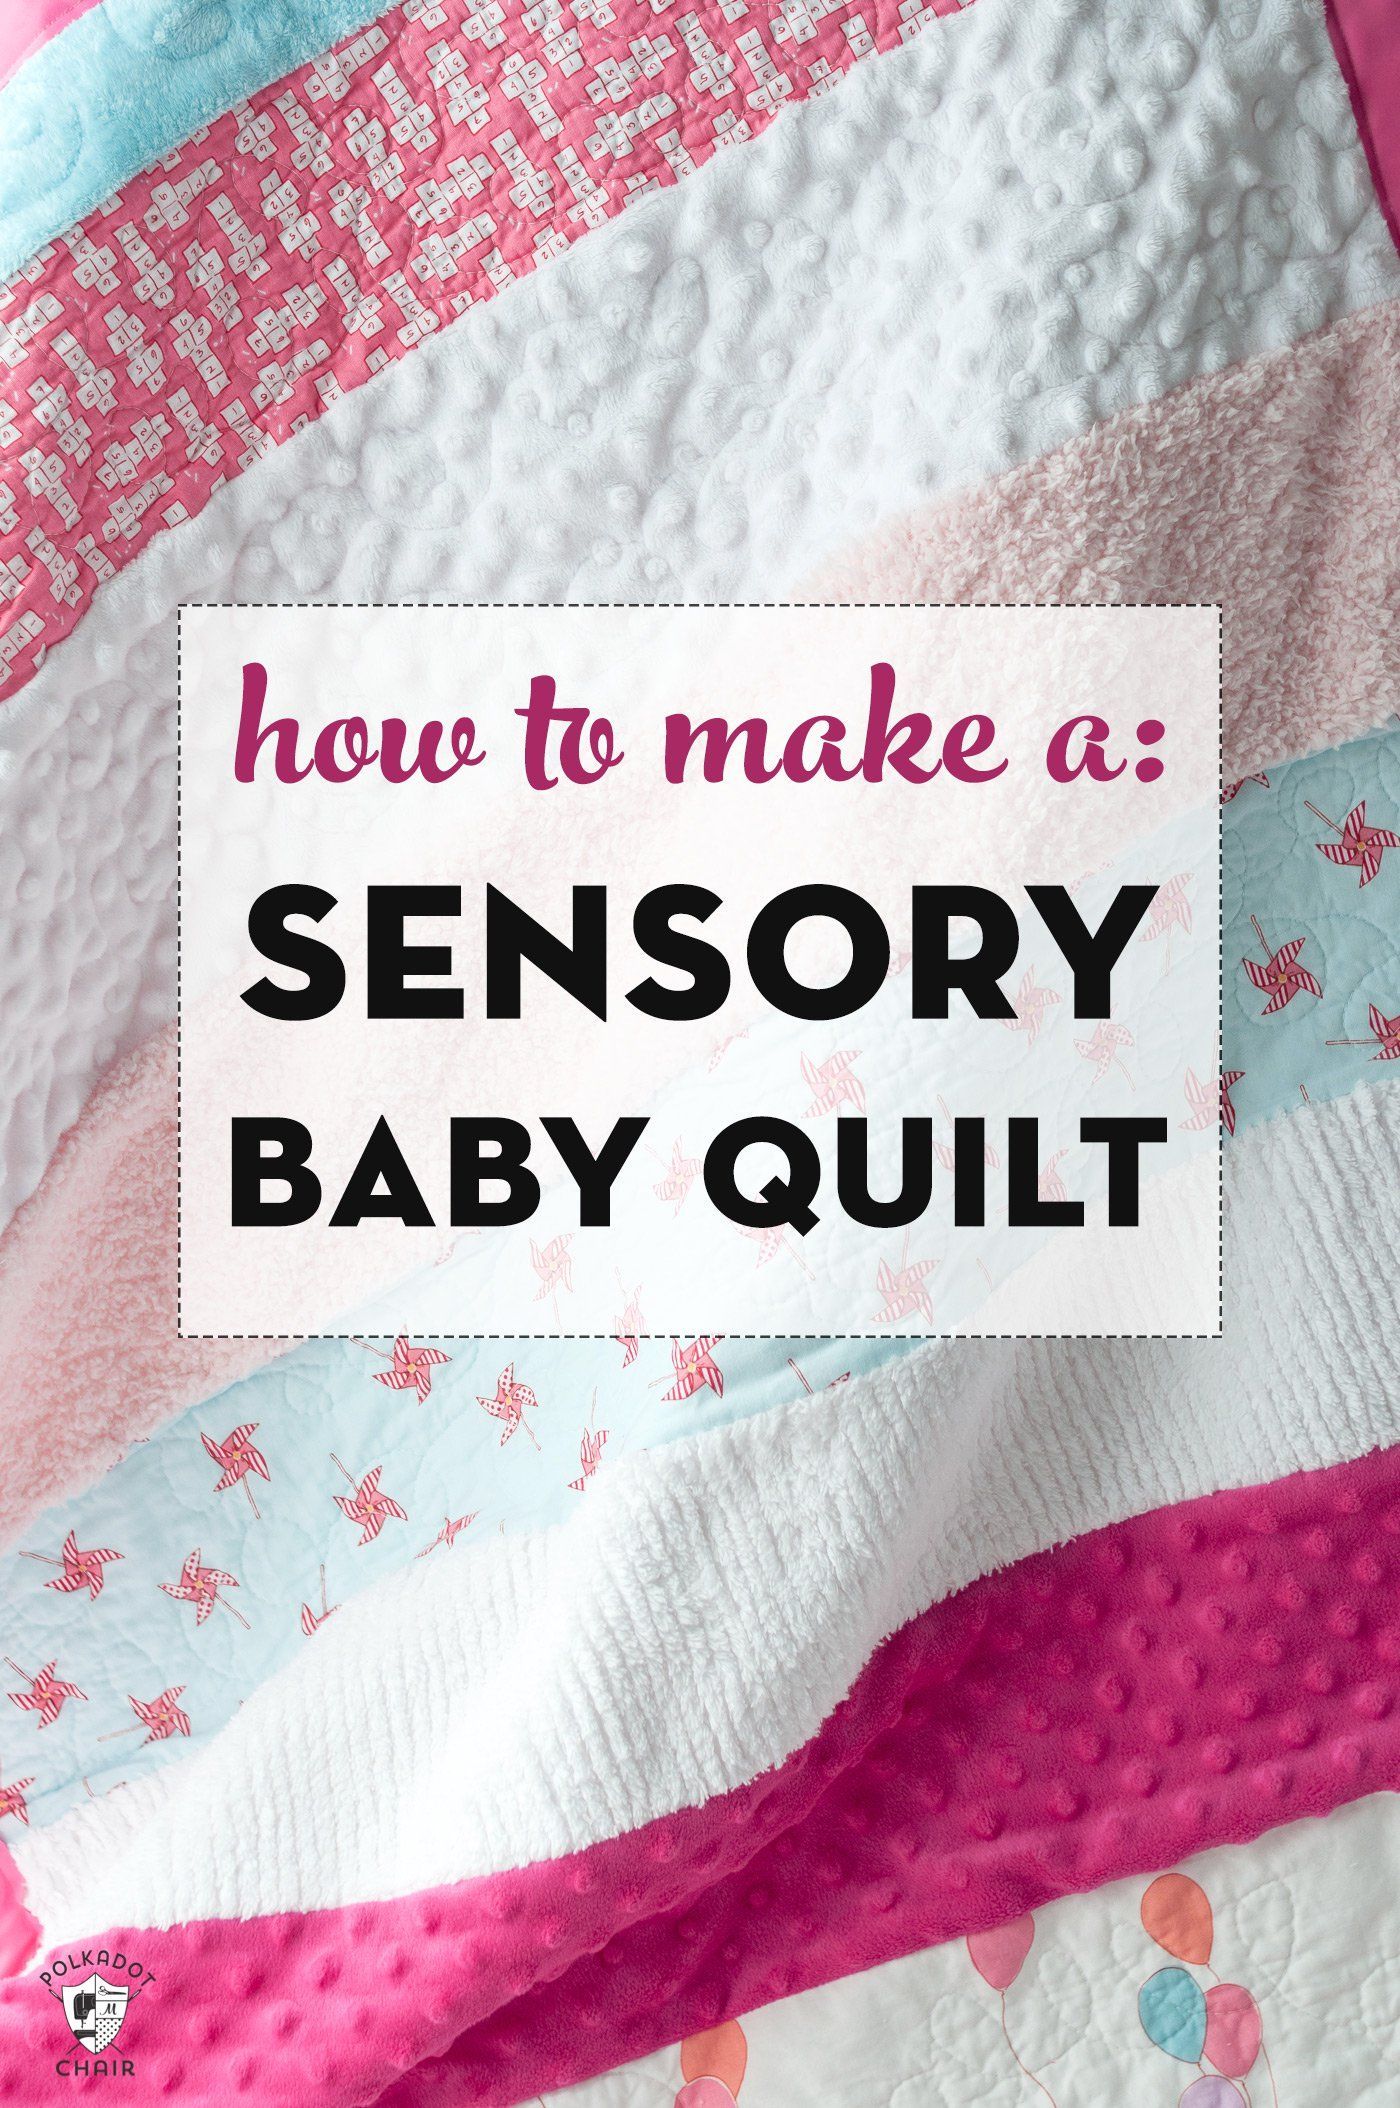 Soft 'n Snuggly Sensory Baby Quilt Tutorial - The Polka Dot Chair -   16 diy projects Baby thoughts ideas